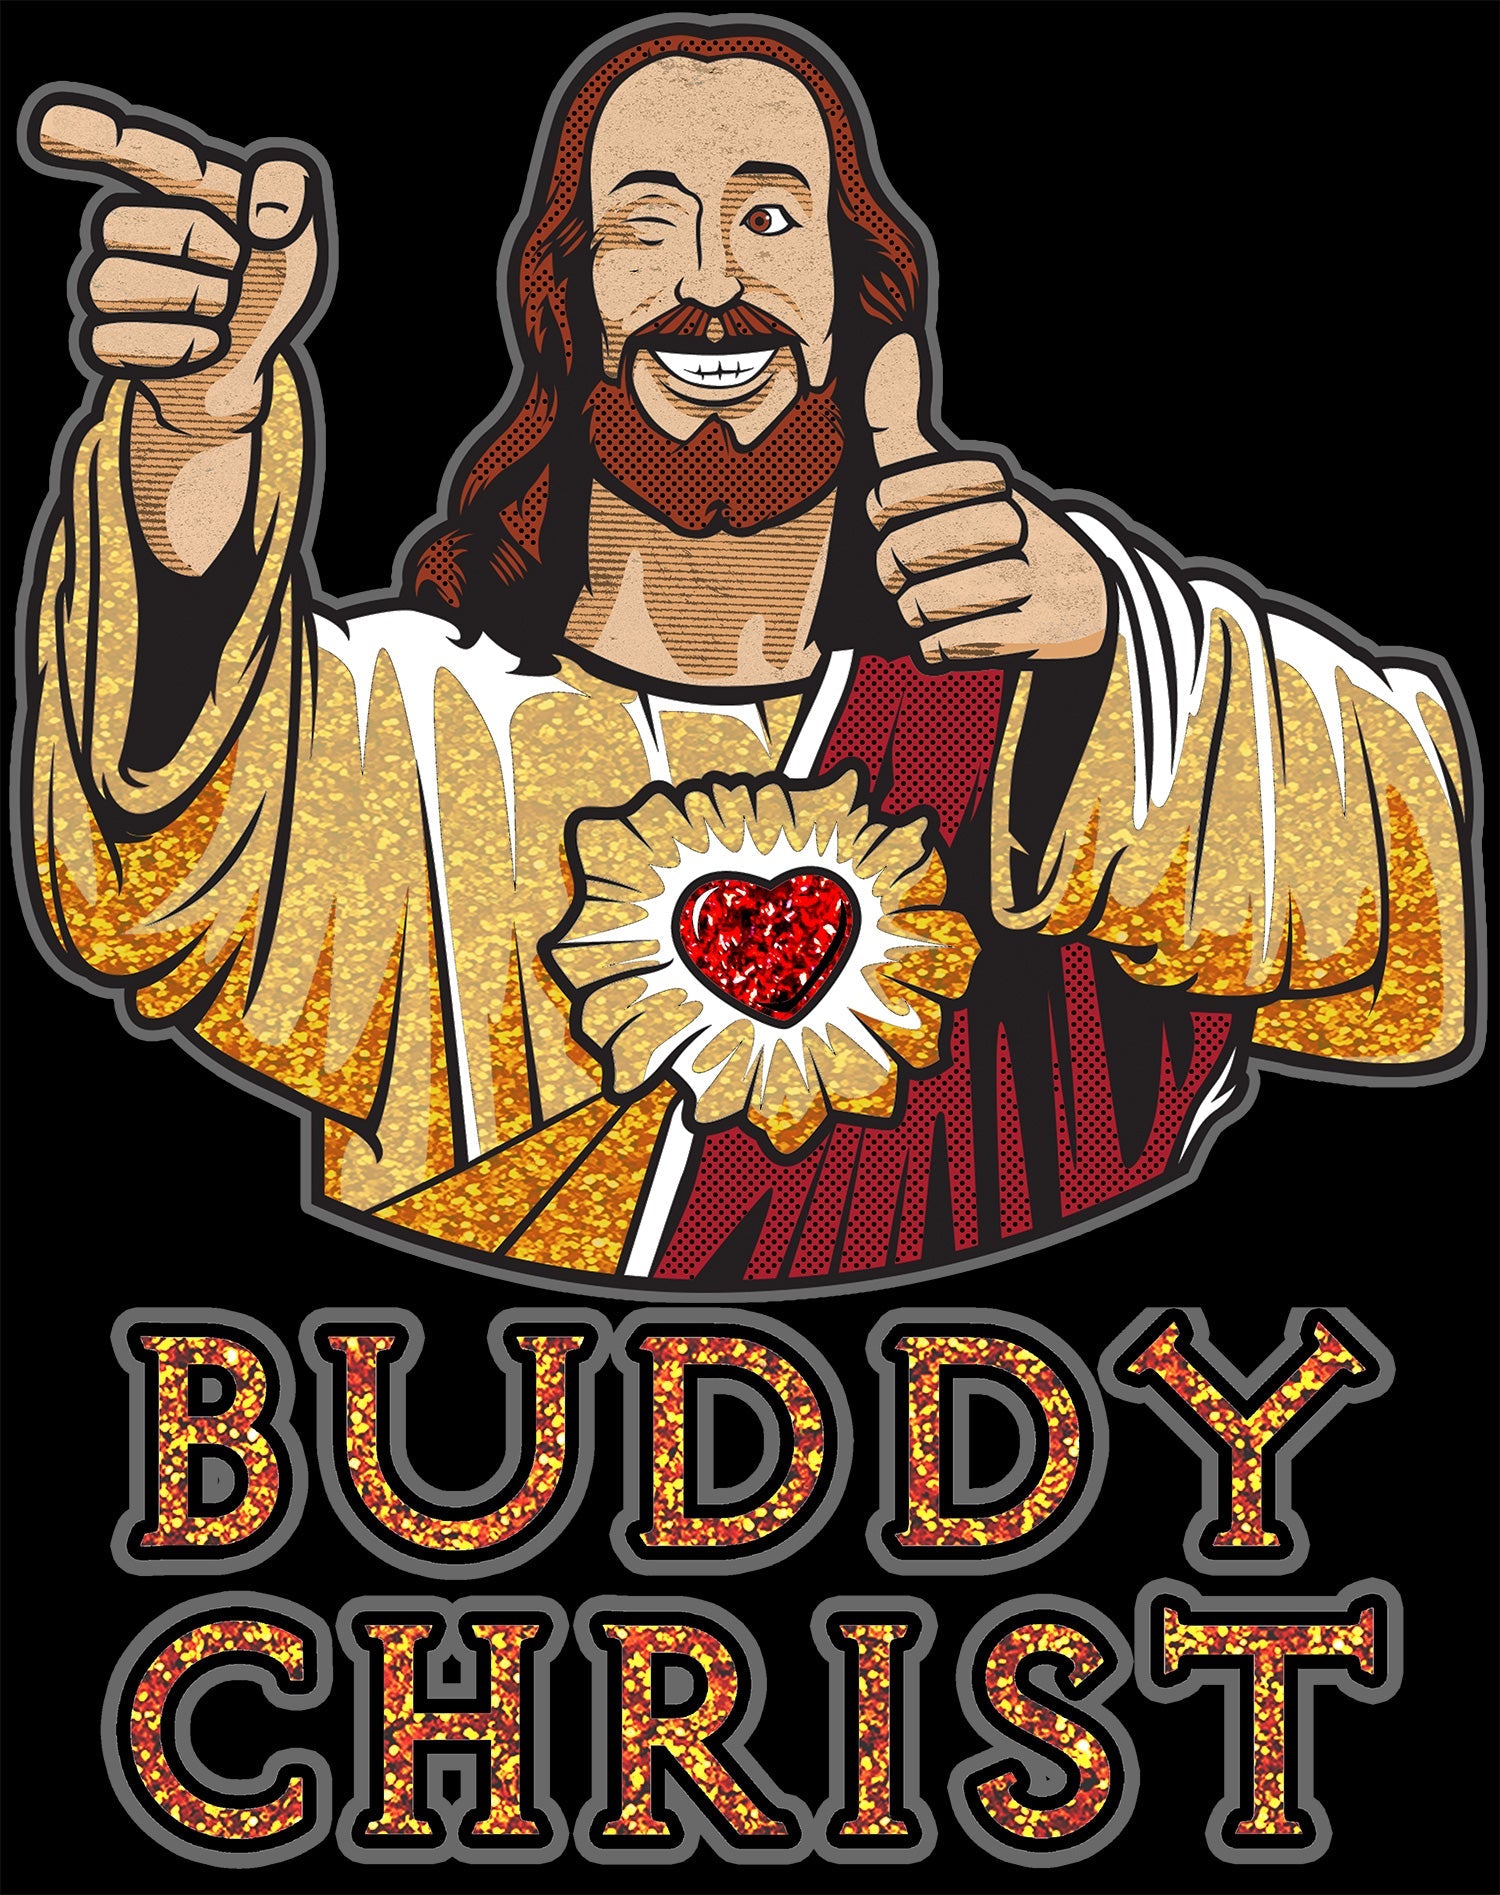 Kevin Smith View Askewniverse Buddy Christ Got Golden Wow Edition Official Sweatshirt